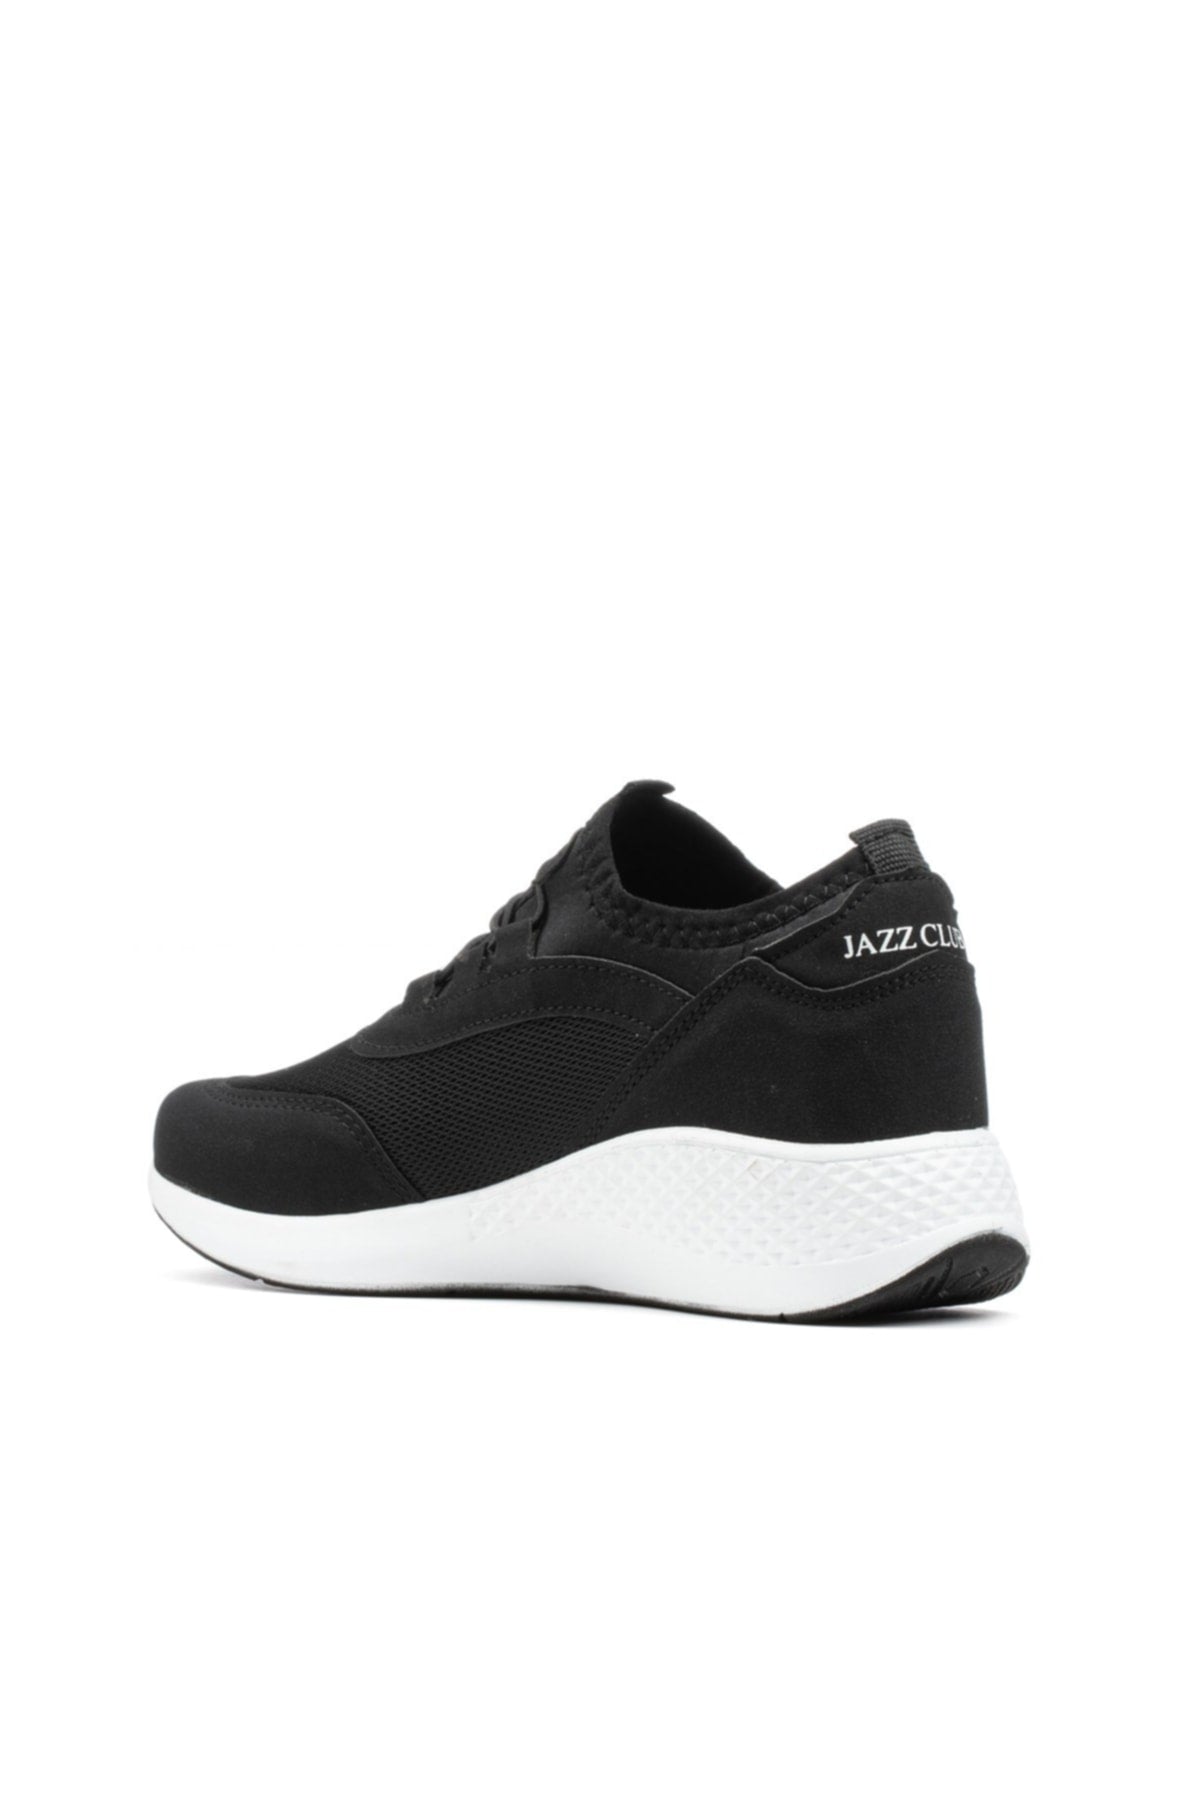 Black - Daily Female Sneaker Laccked Sport Shoes